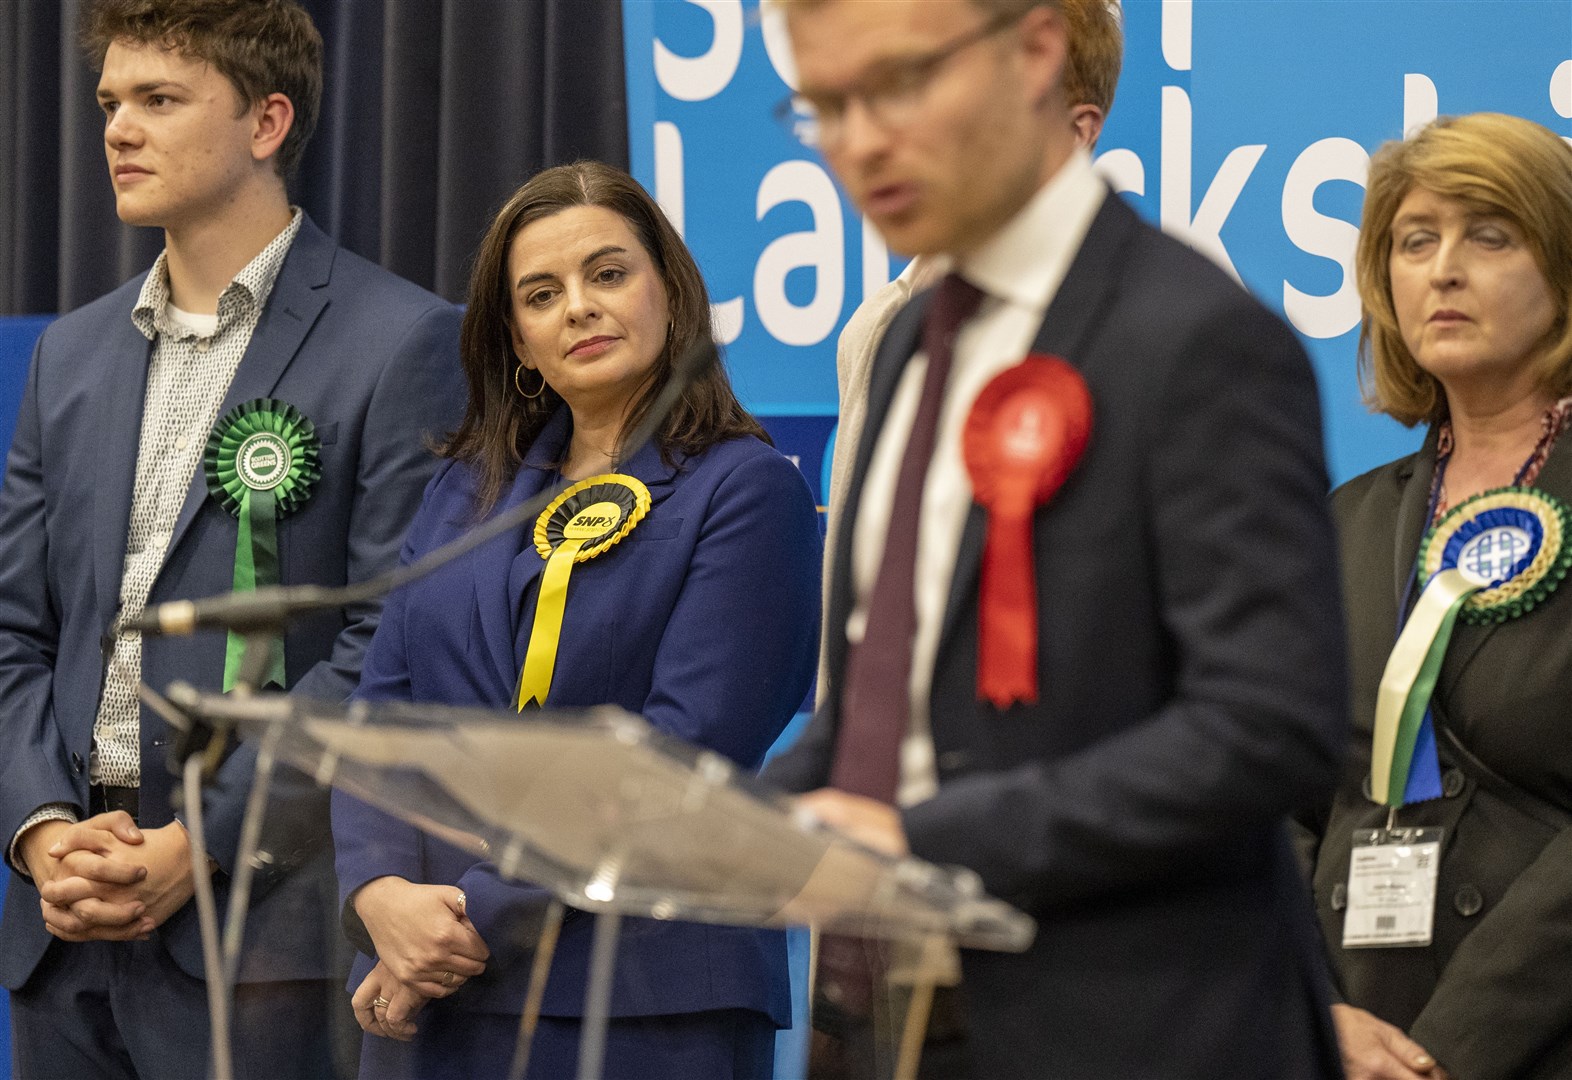 SNP candidate Katy Louden, second left, was heavily defeated by Labour’s Michael Shanks (Jane Barlow/PA)